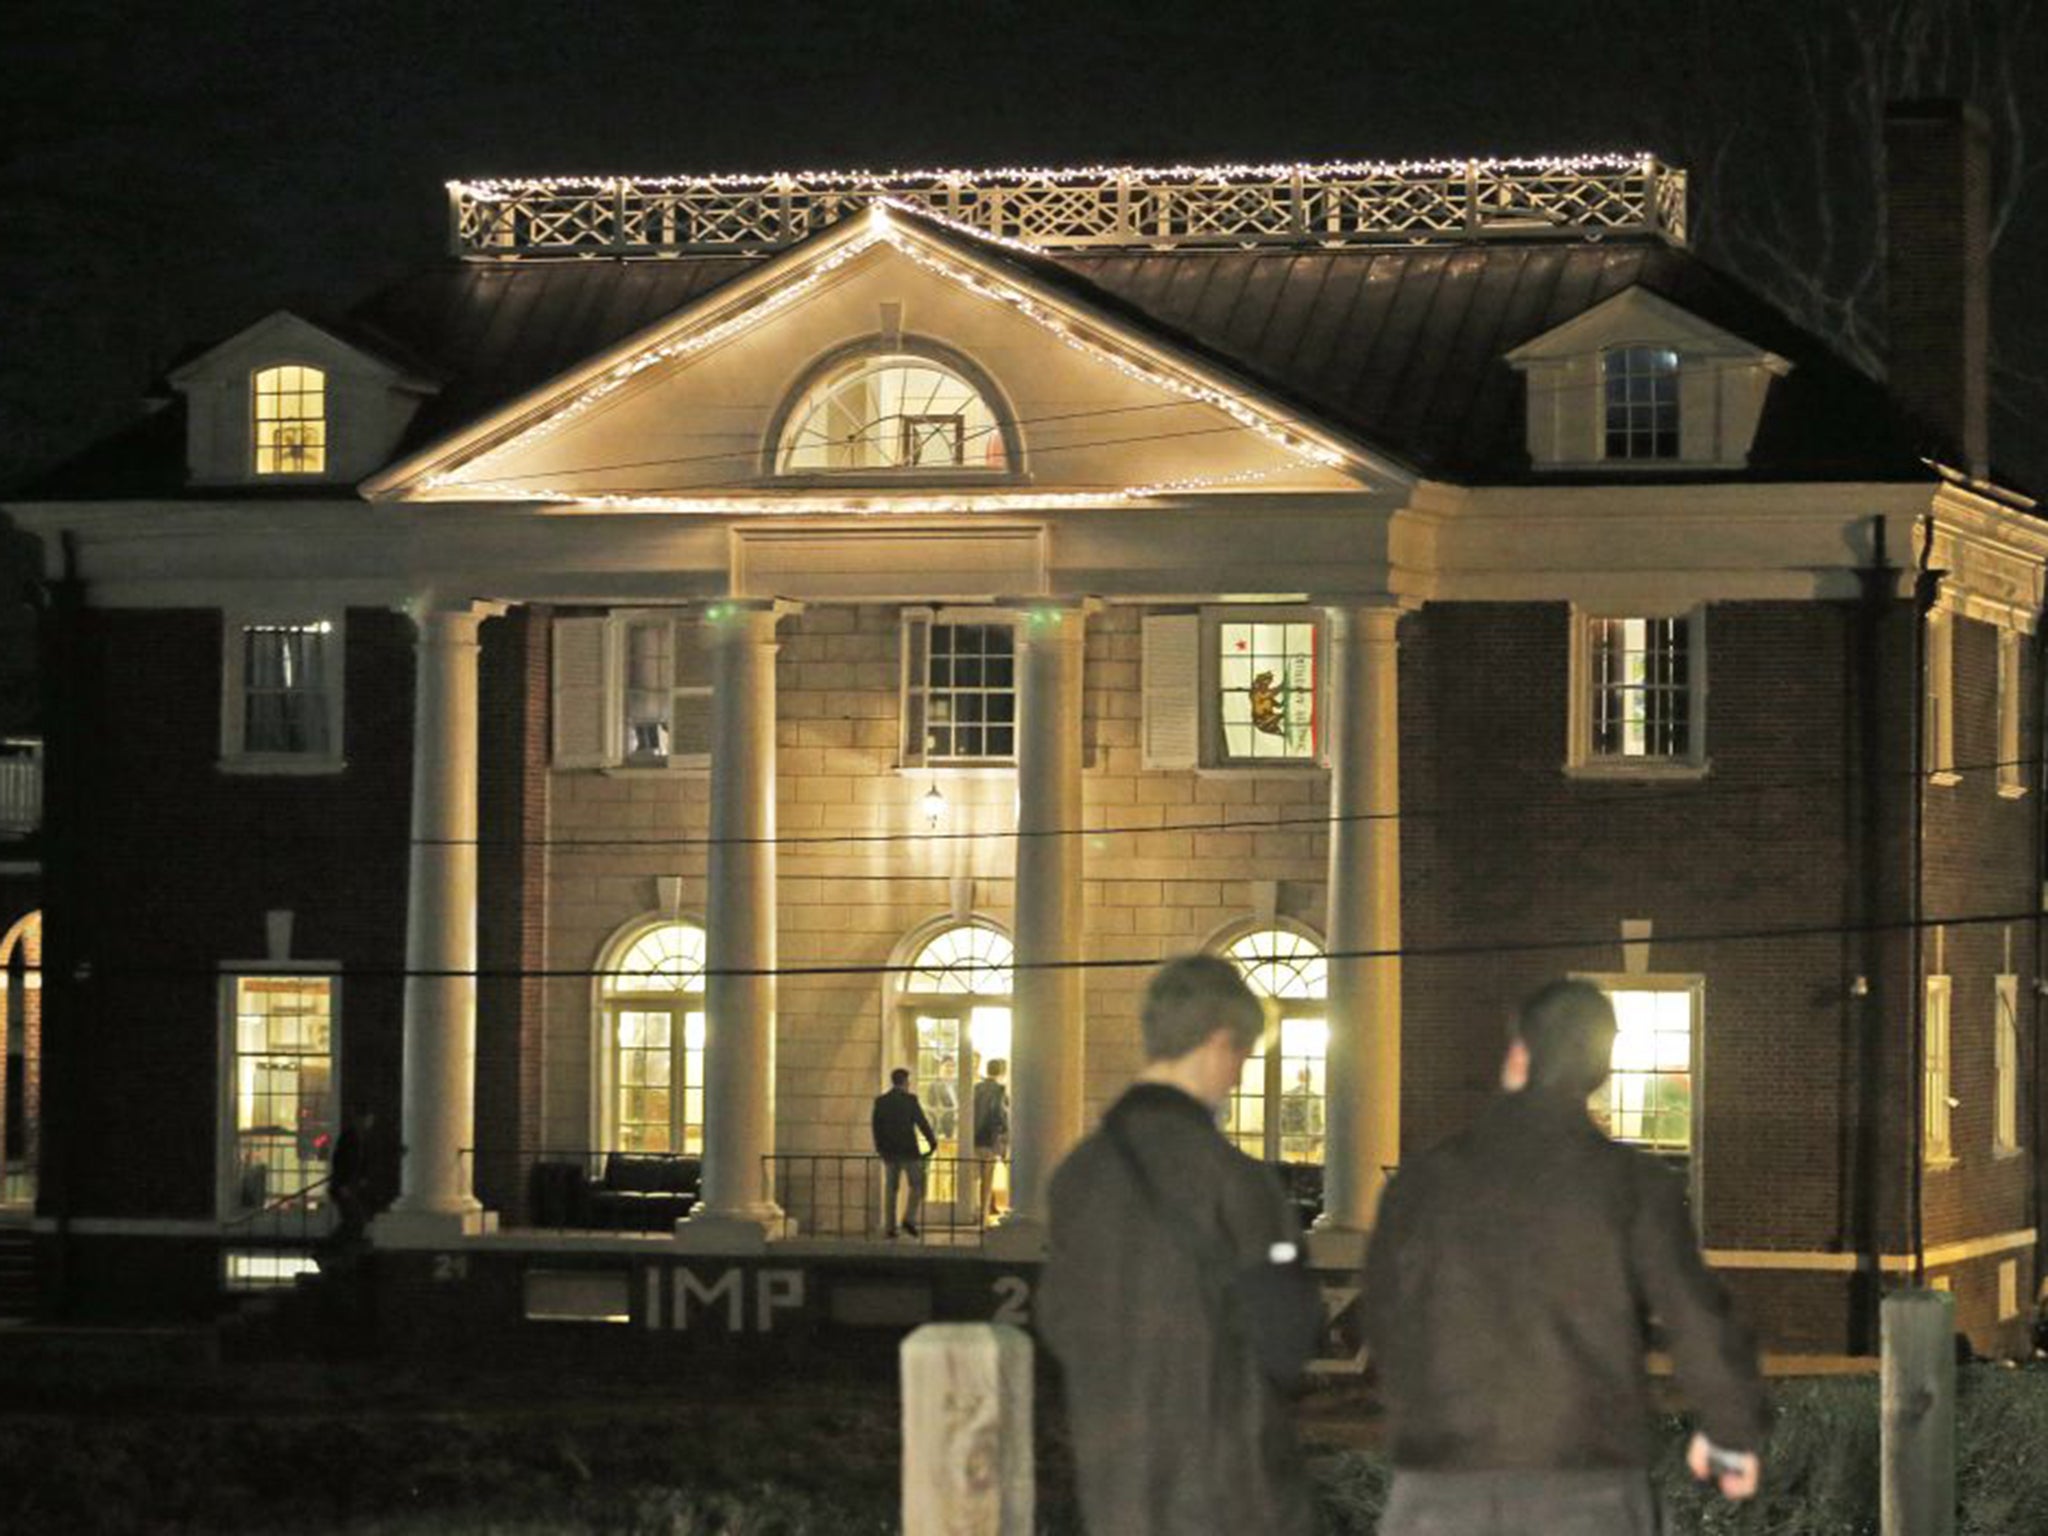 The story, entitled “A Rape on Campus”, centred on the Phi Kappa Psi house at the University of Virginia in Charlottesville